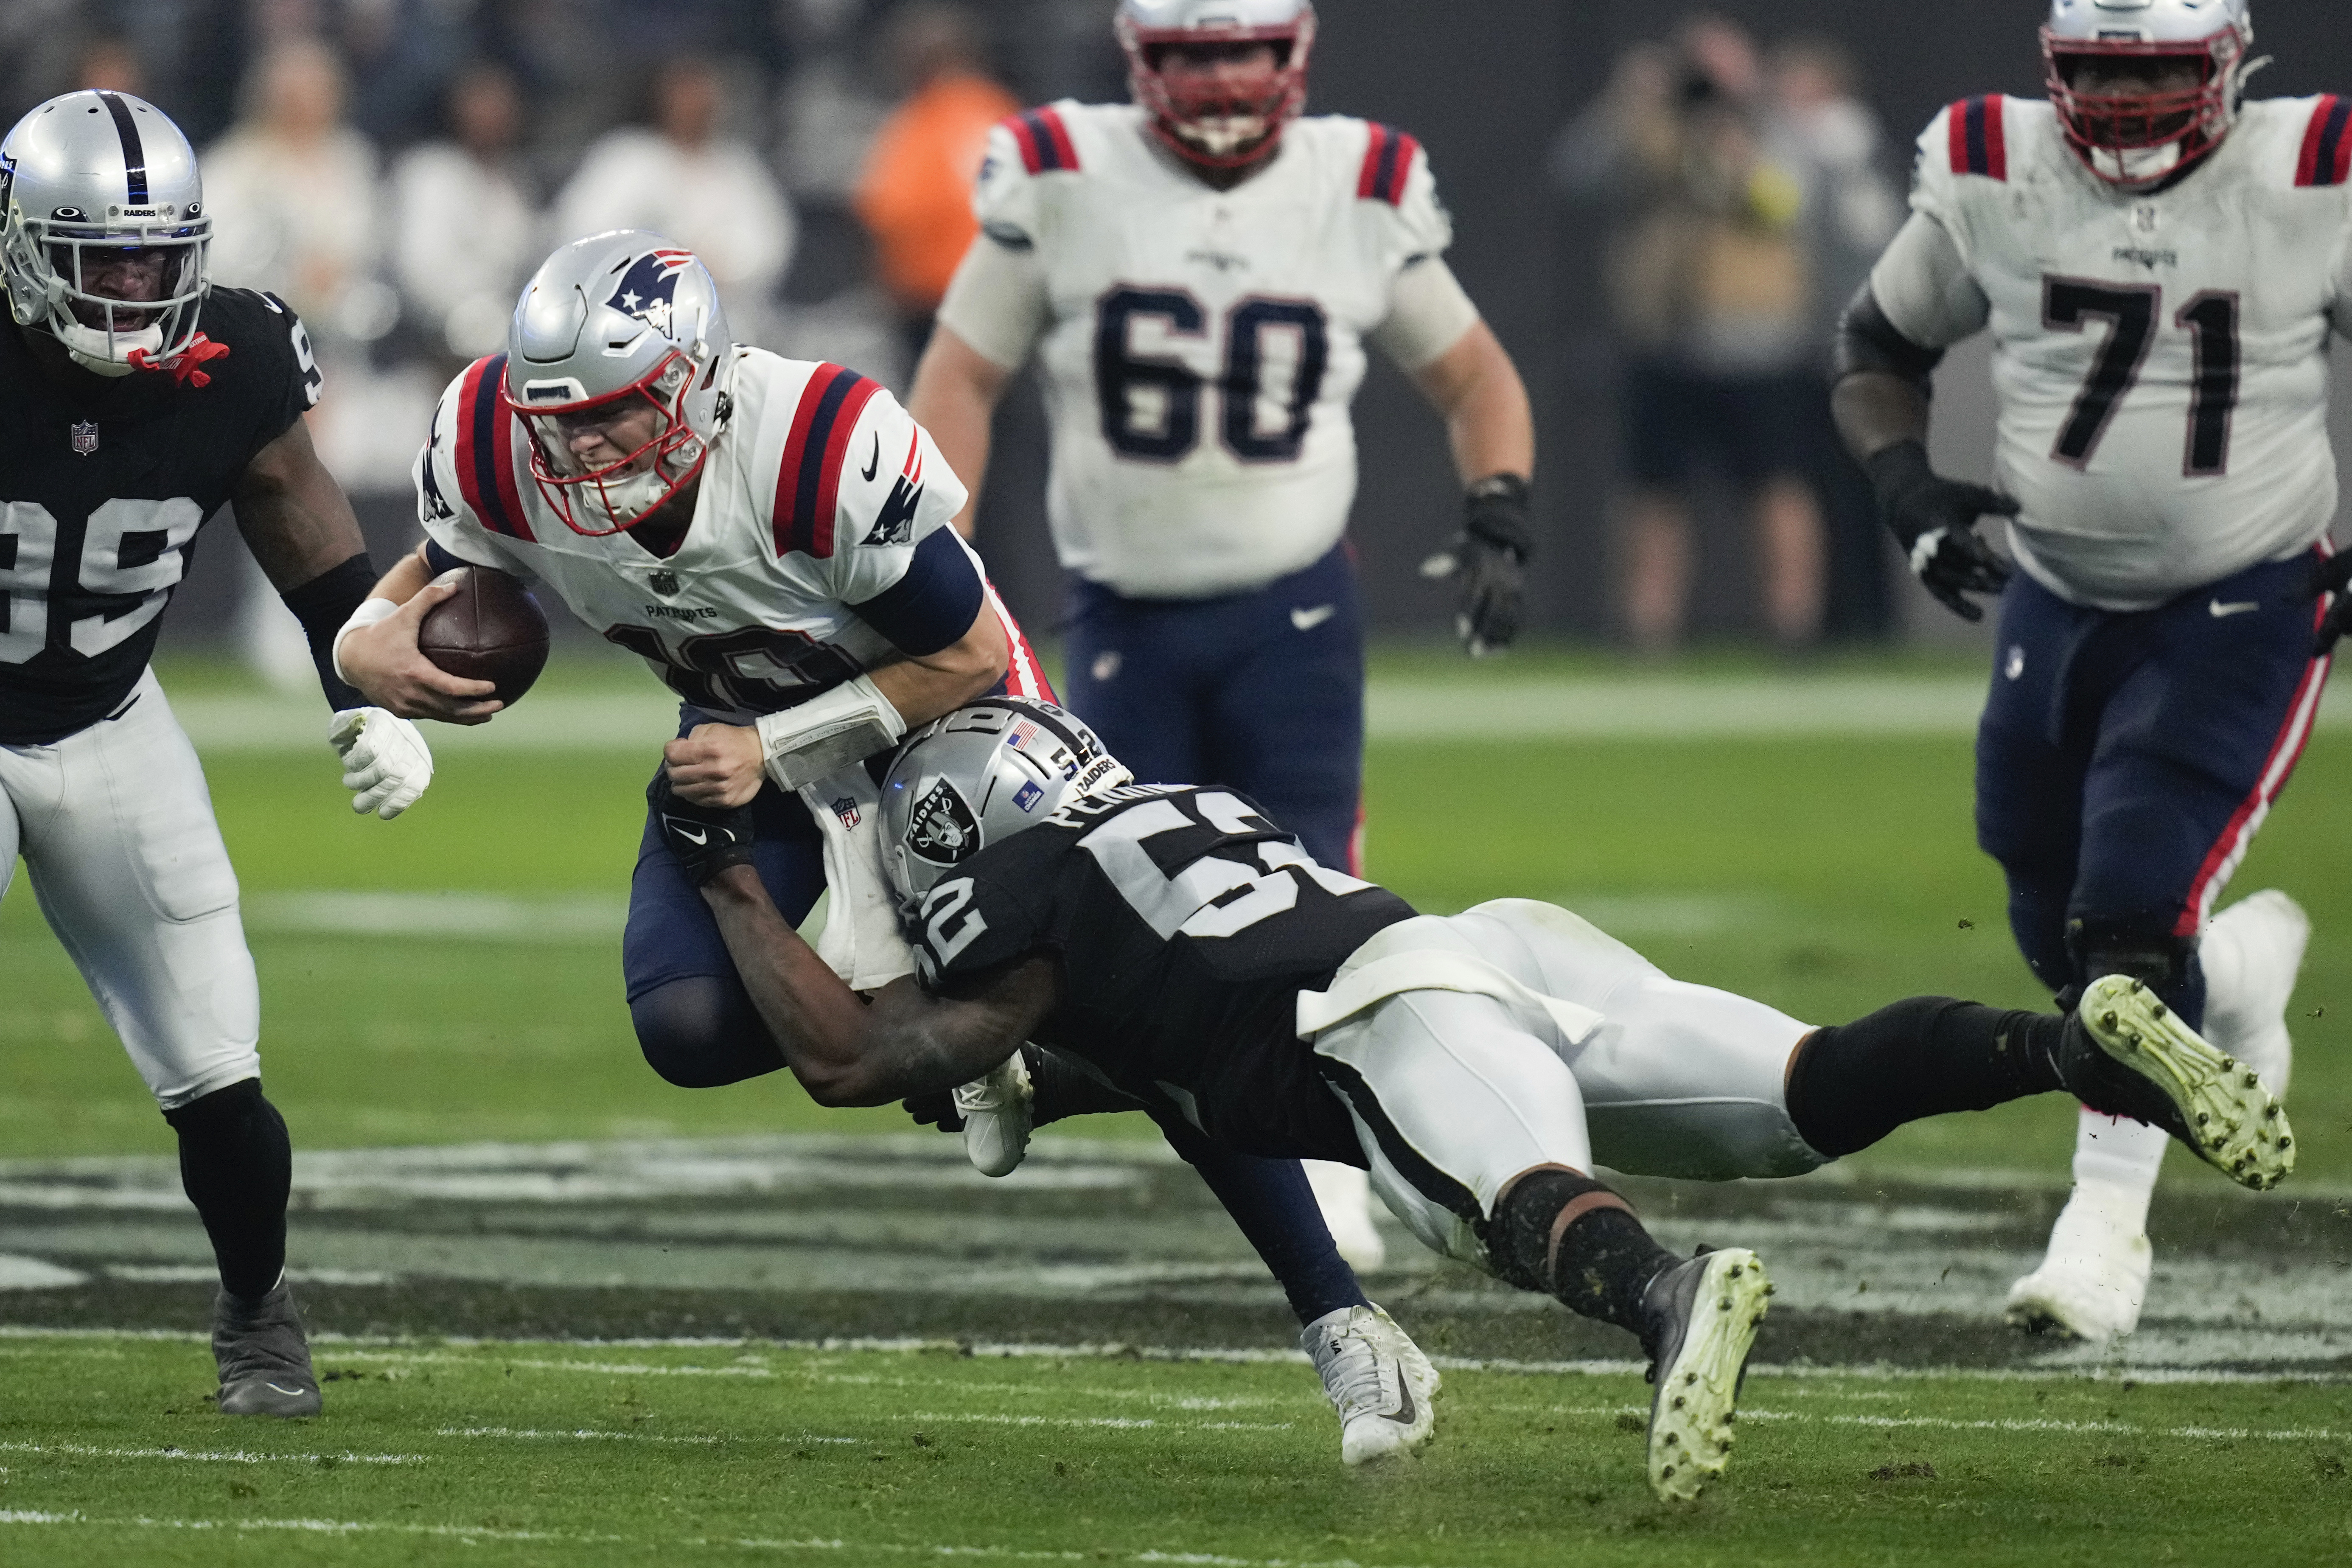 Here are 3 reasons why the Patriots lost to the Las Vegas Raiders